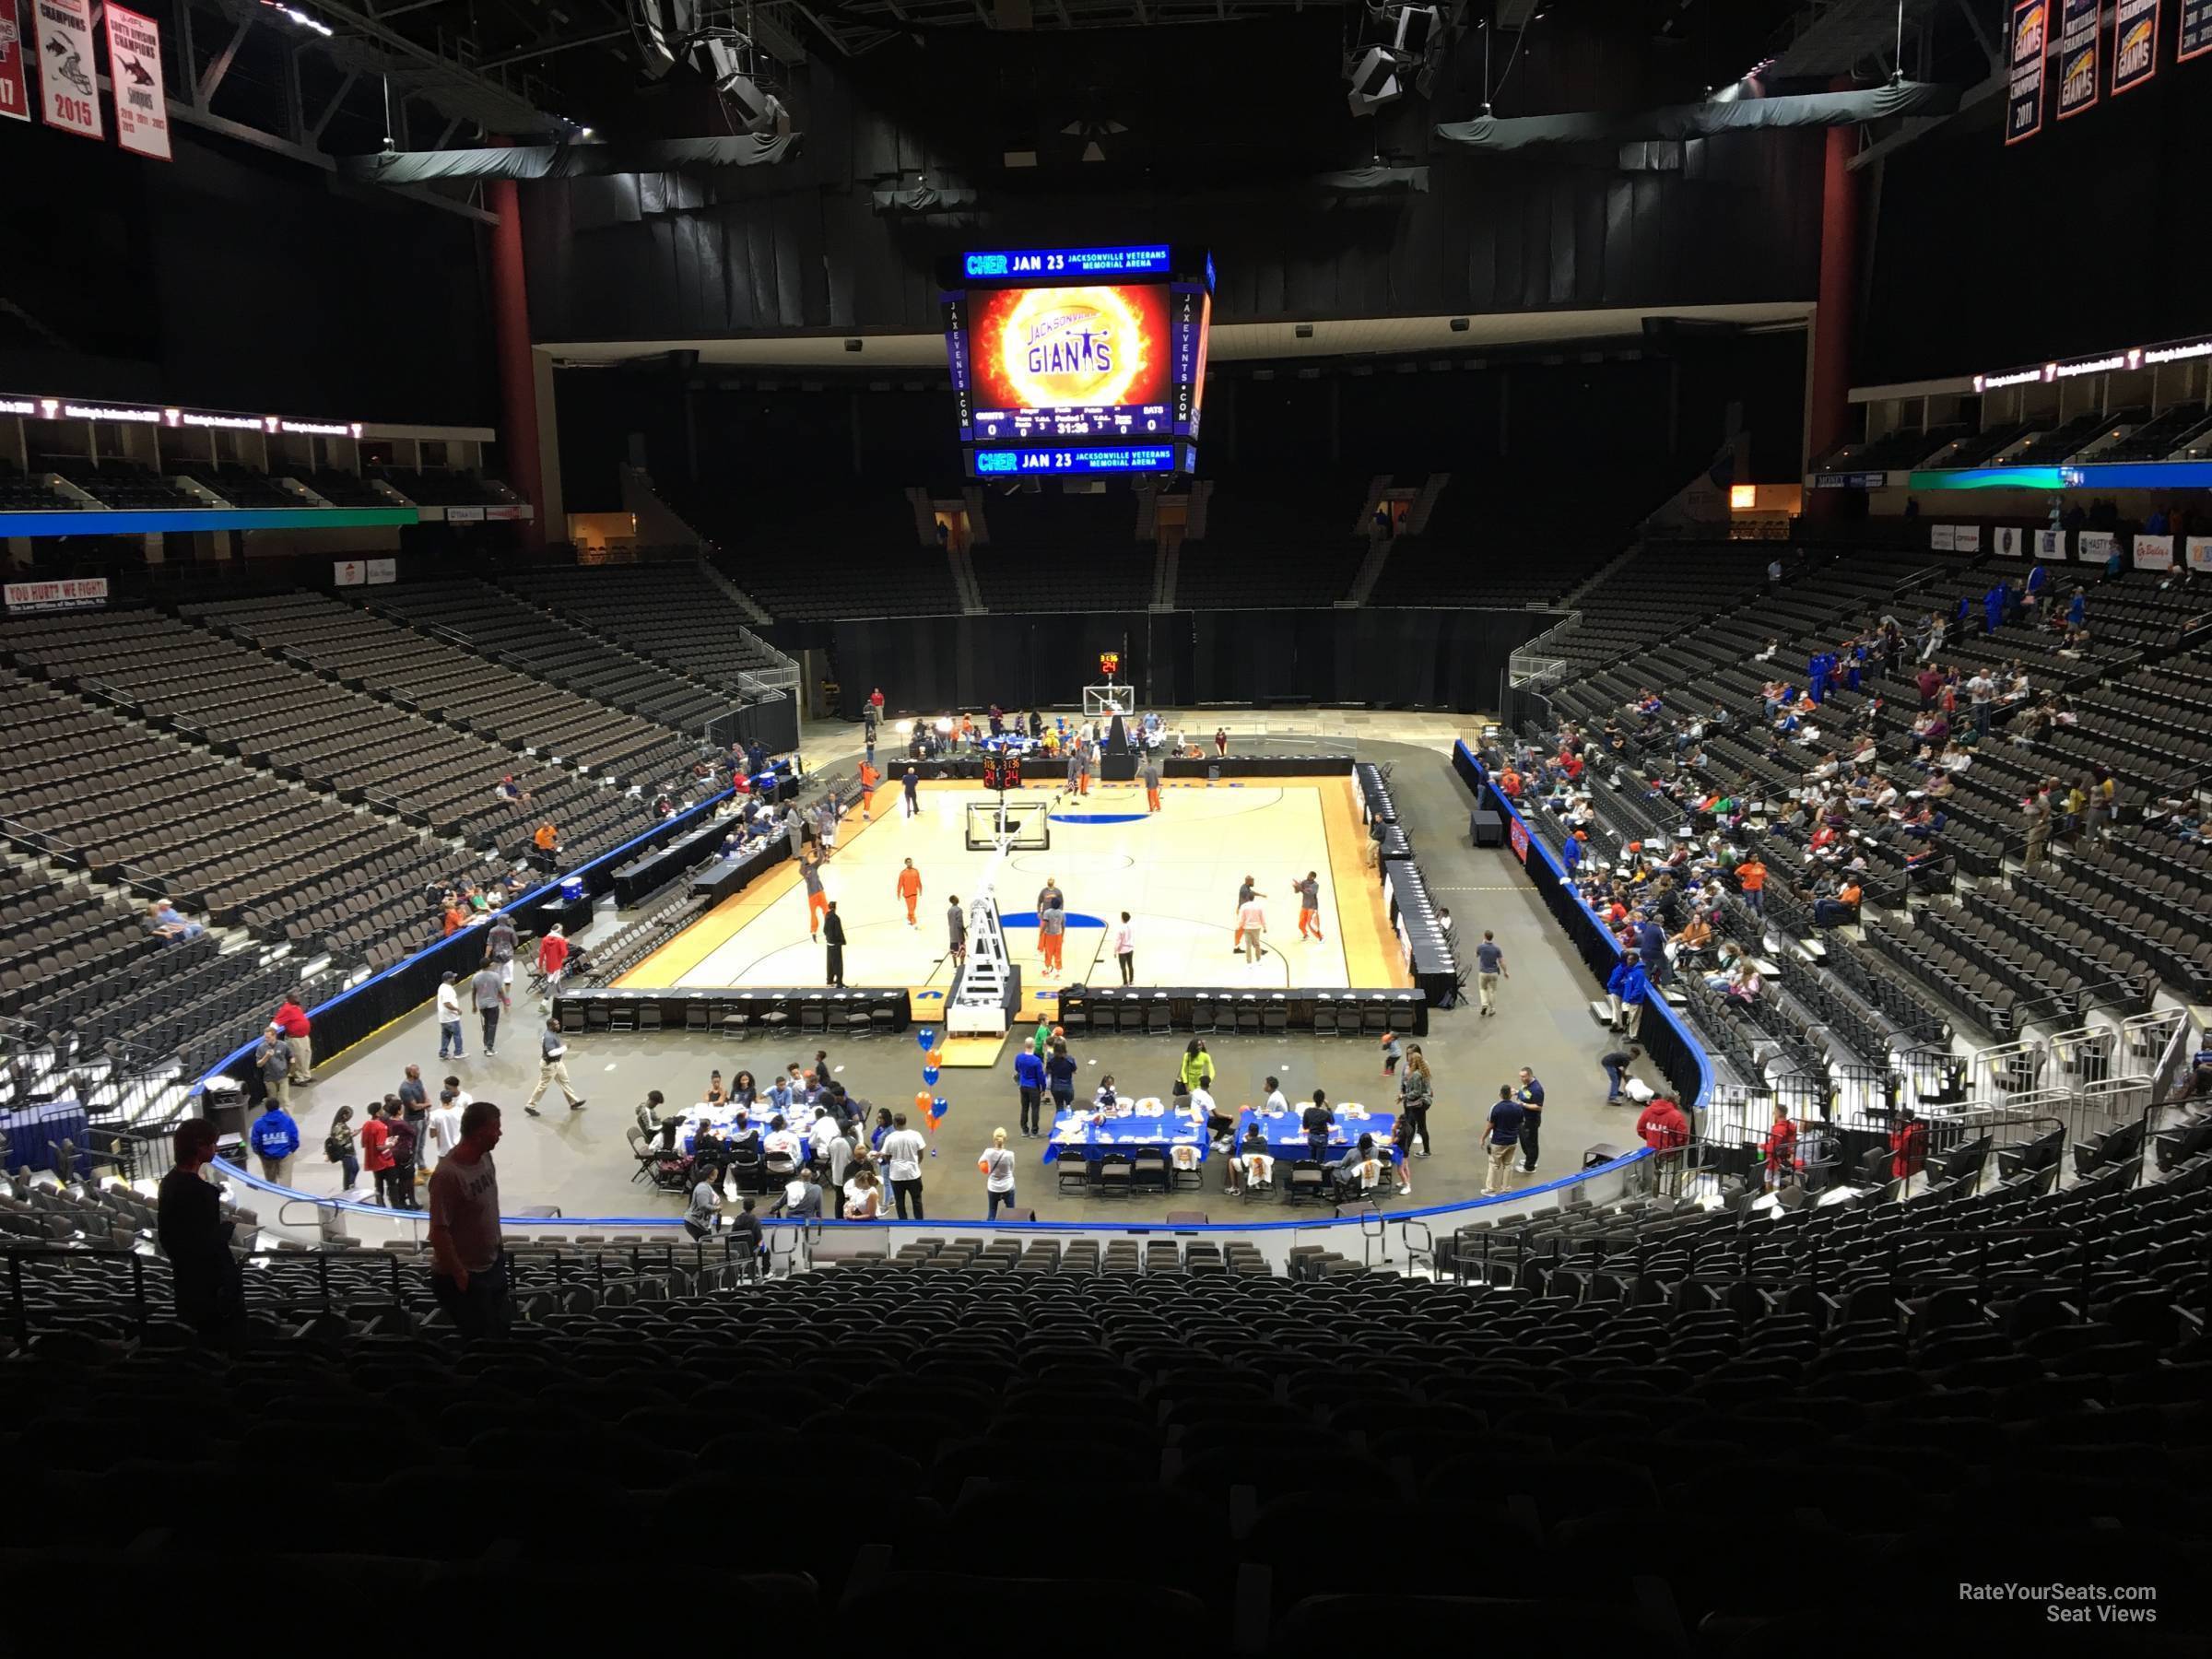 section 108, row cc seat view  for basketball - vystar veterans memorial arena